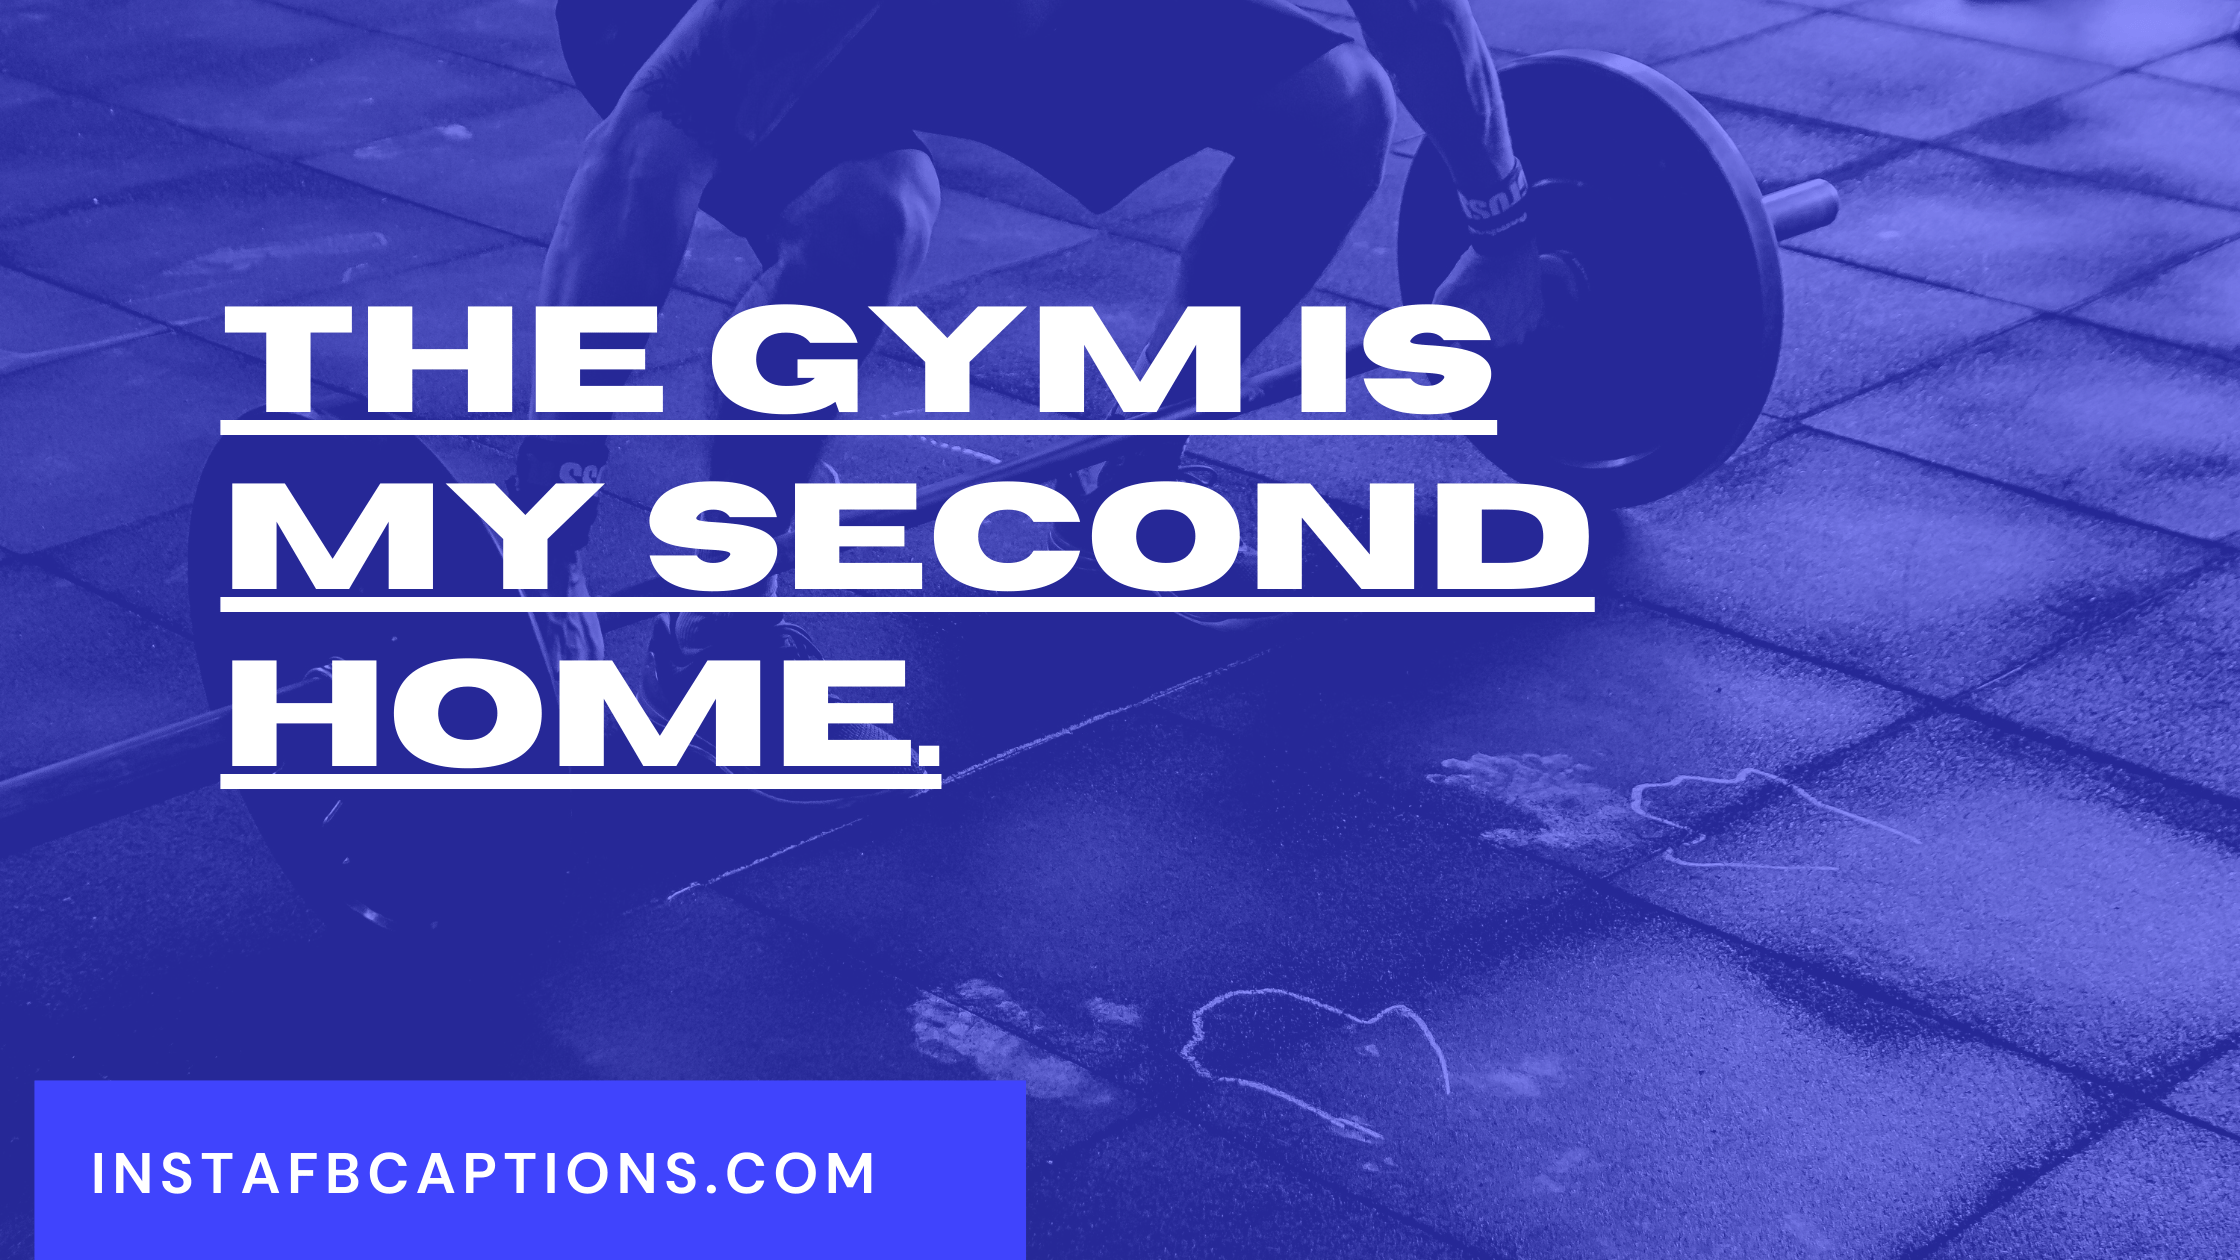 The gym is my second home  - Captions for Exercises in GYM - [NEW] Gym Captions for Instagram Workout Selfies in 2023